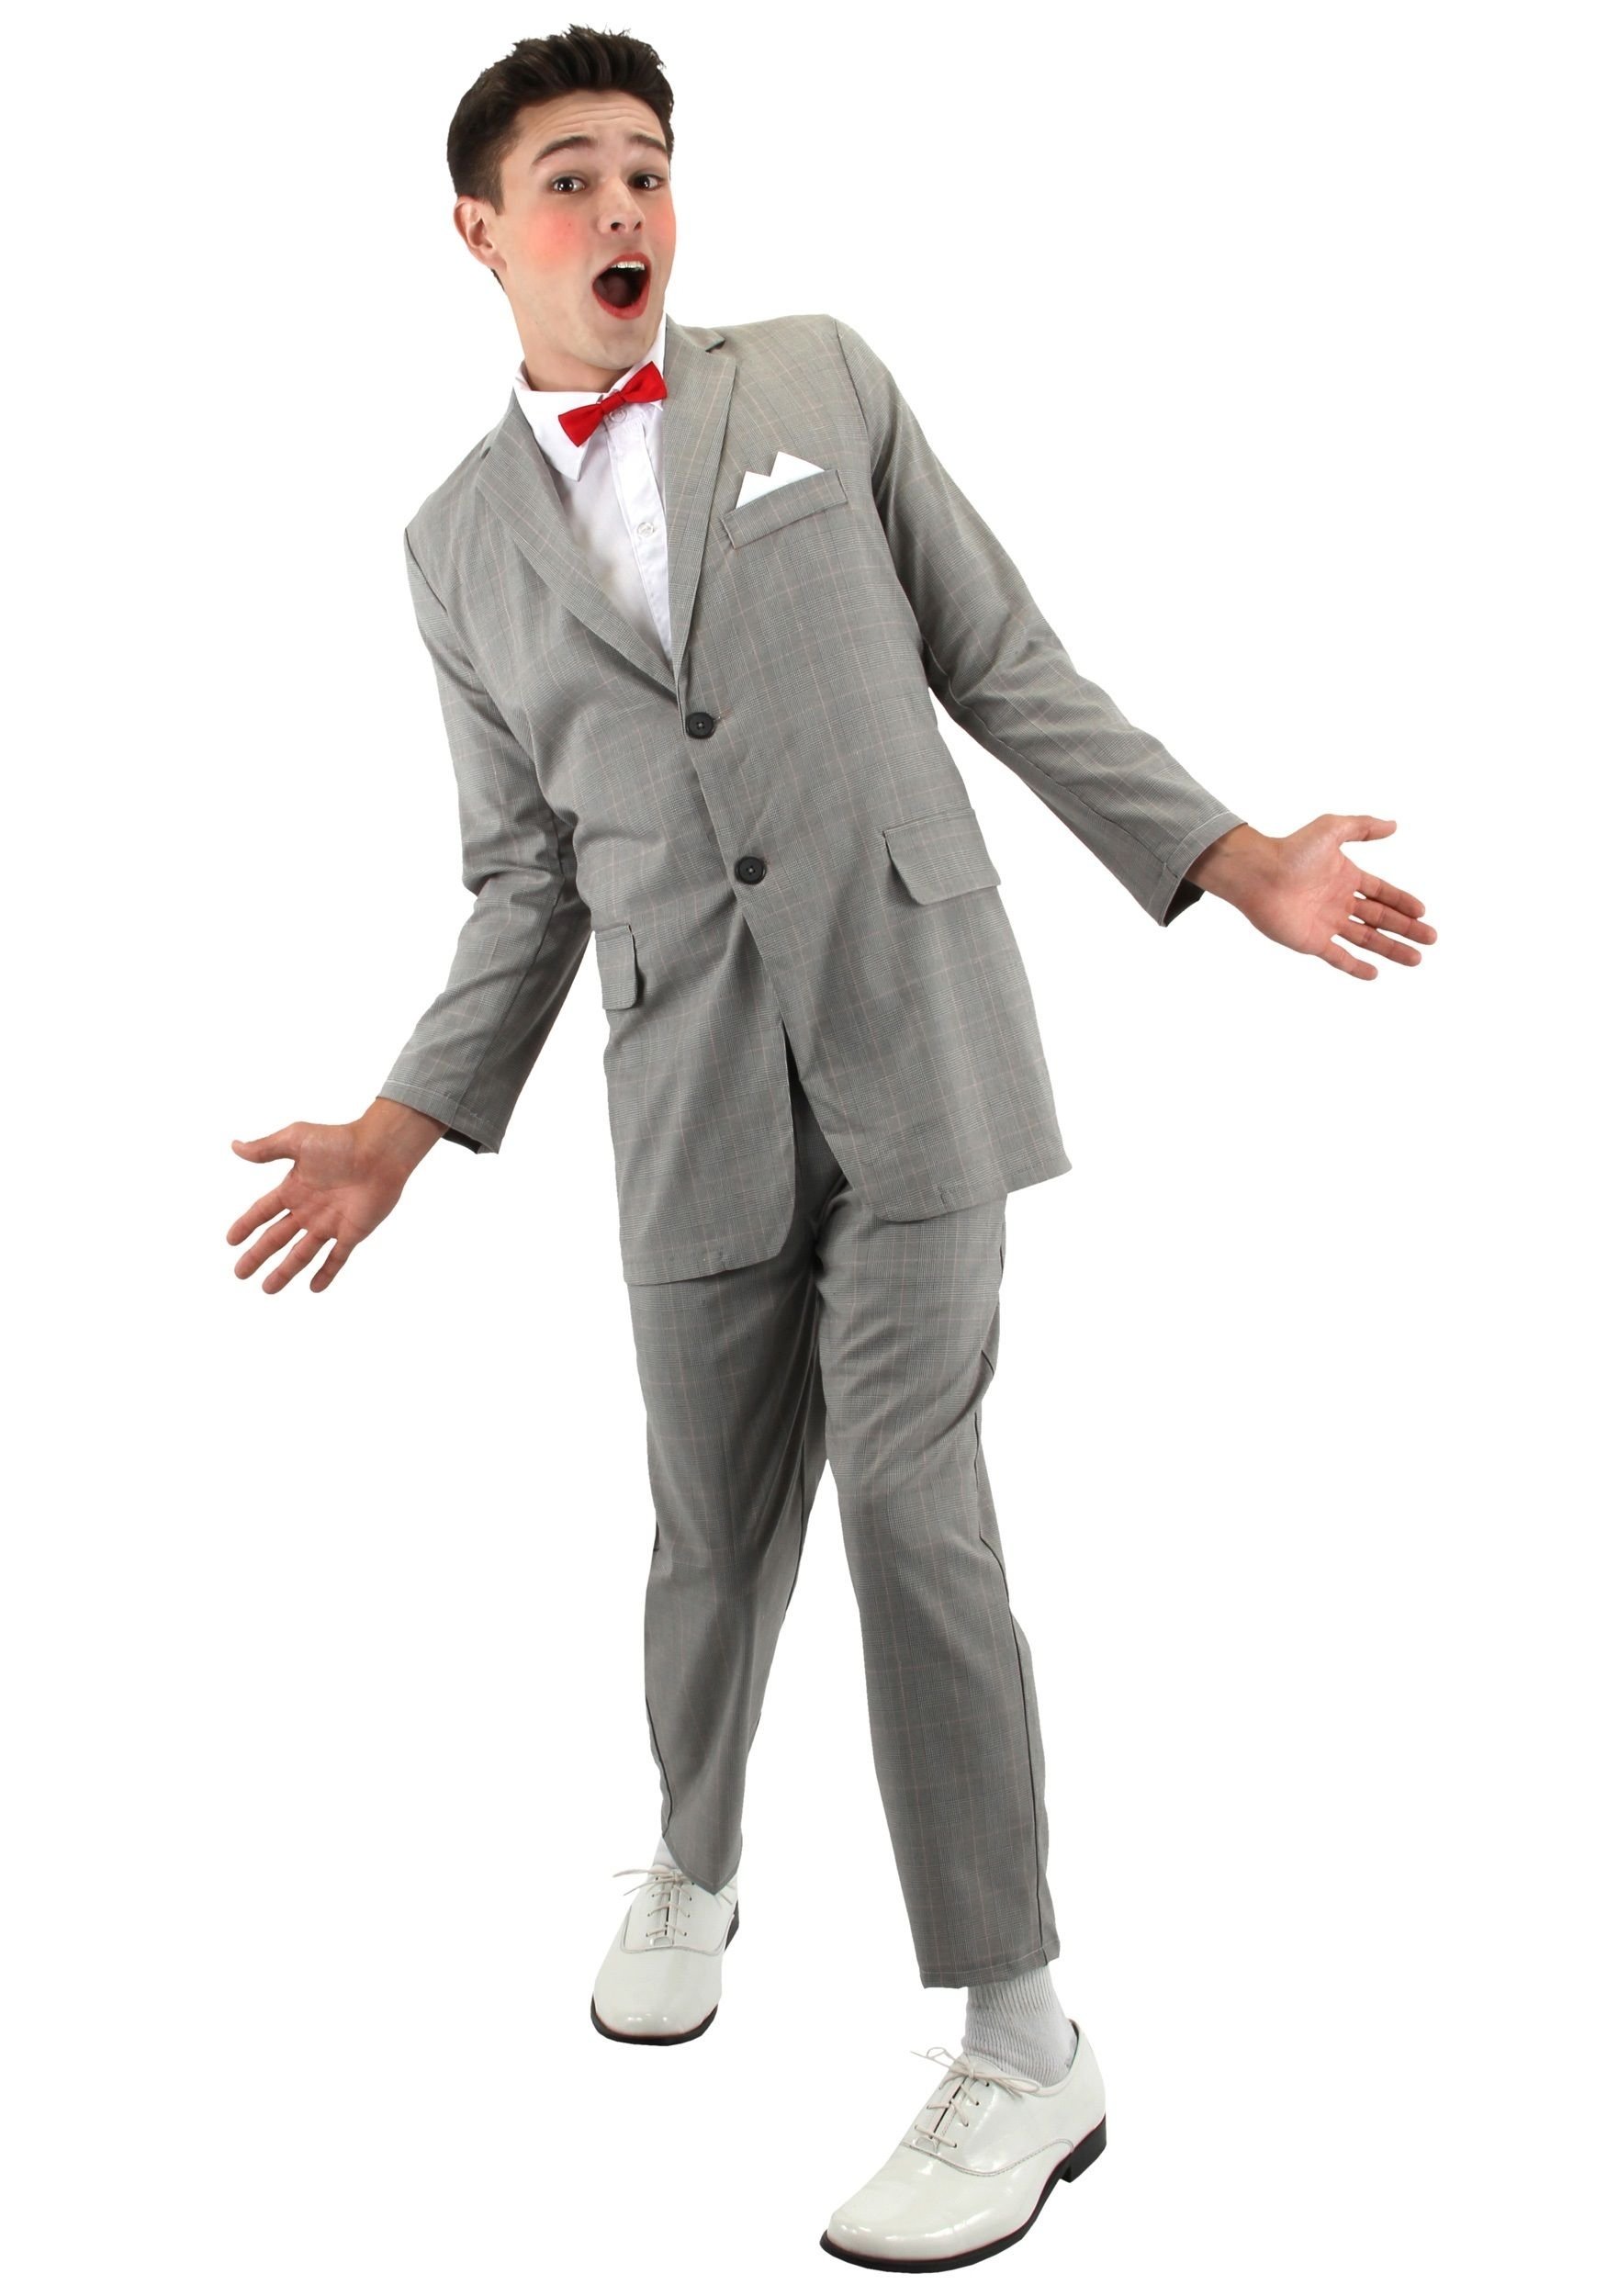 10 Fabulous 80S Costume Ideas For Guys 80s costumes pee wee herman 80s mens costume classic 80s mens 2022